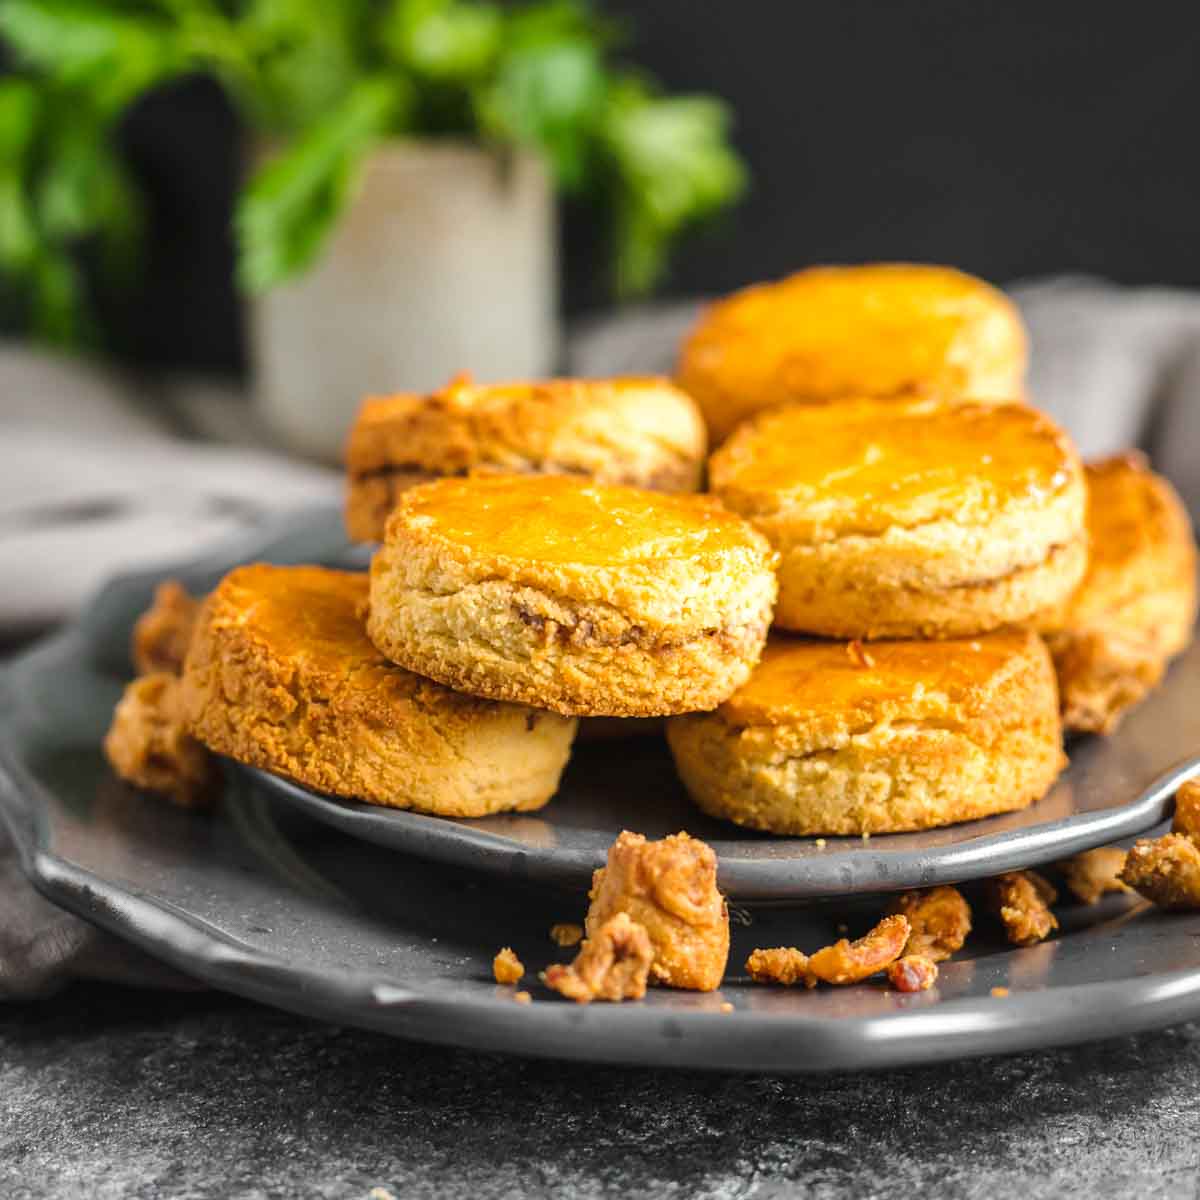 Low Carb Biscuits served on a grey plates.